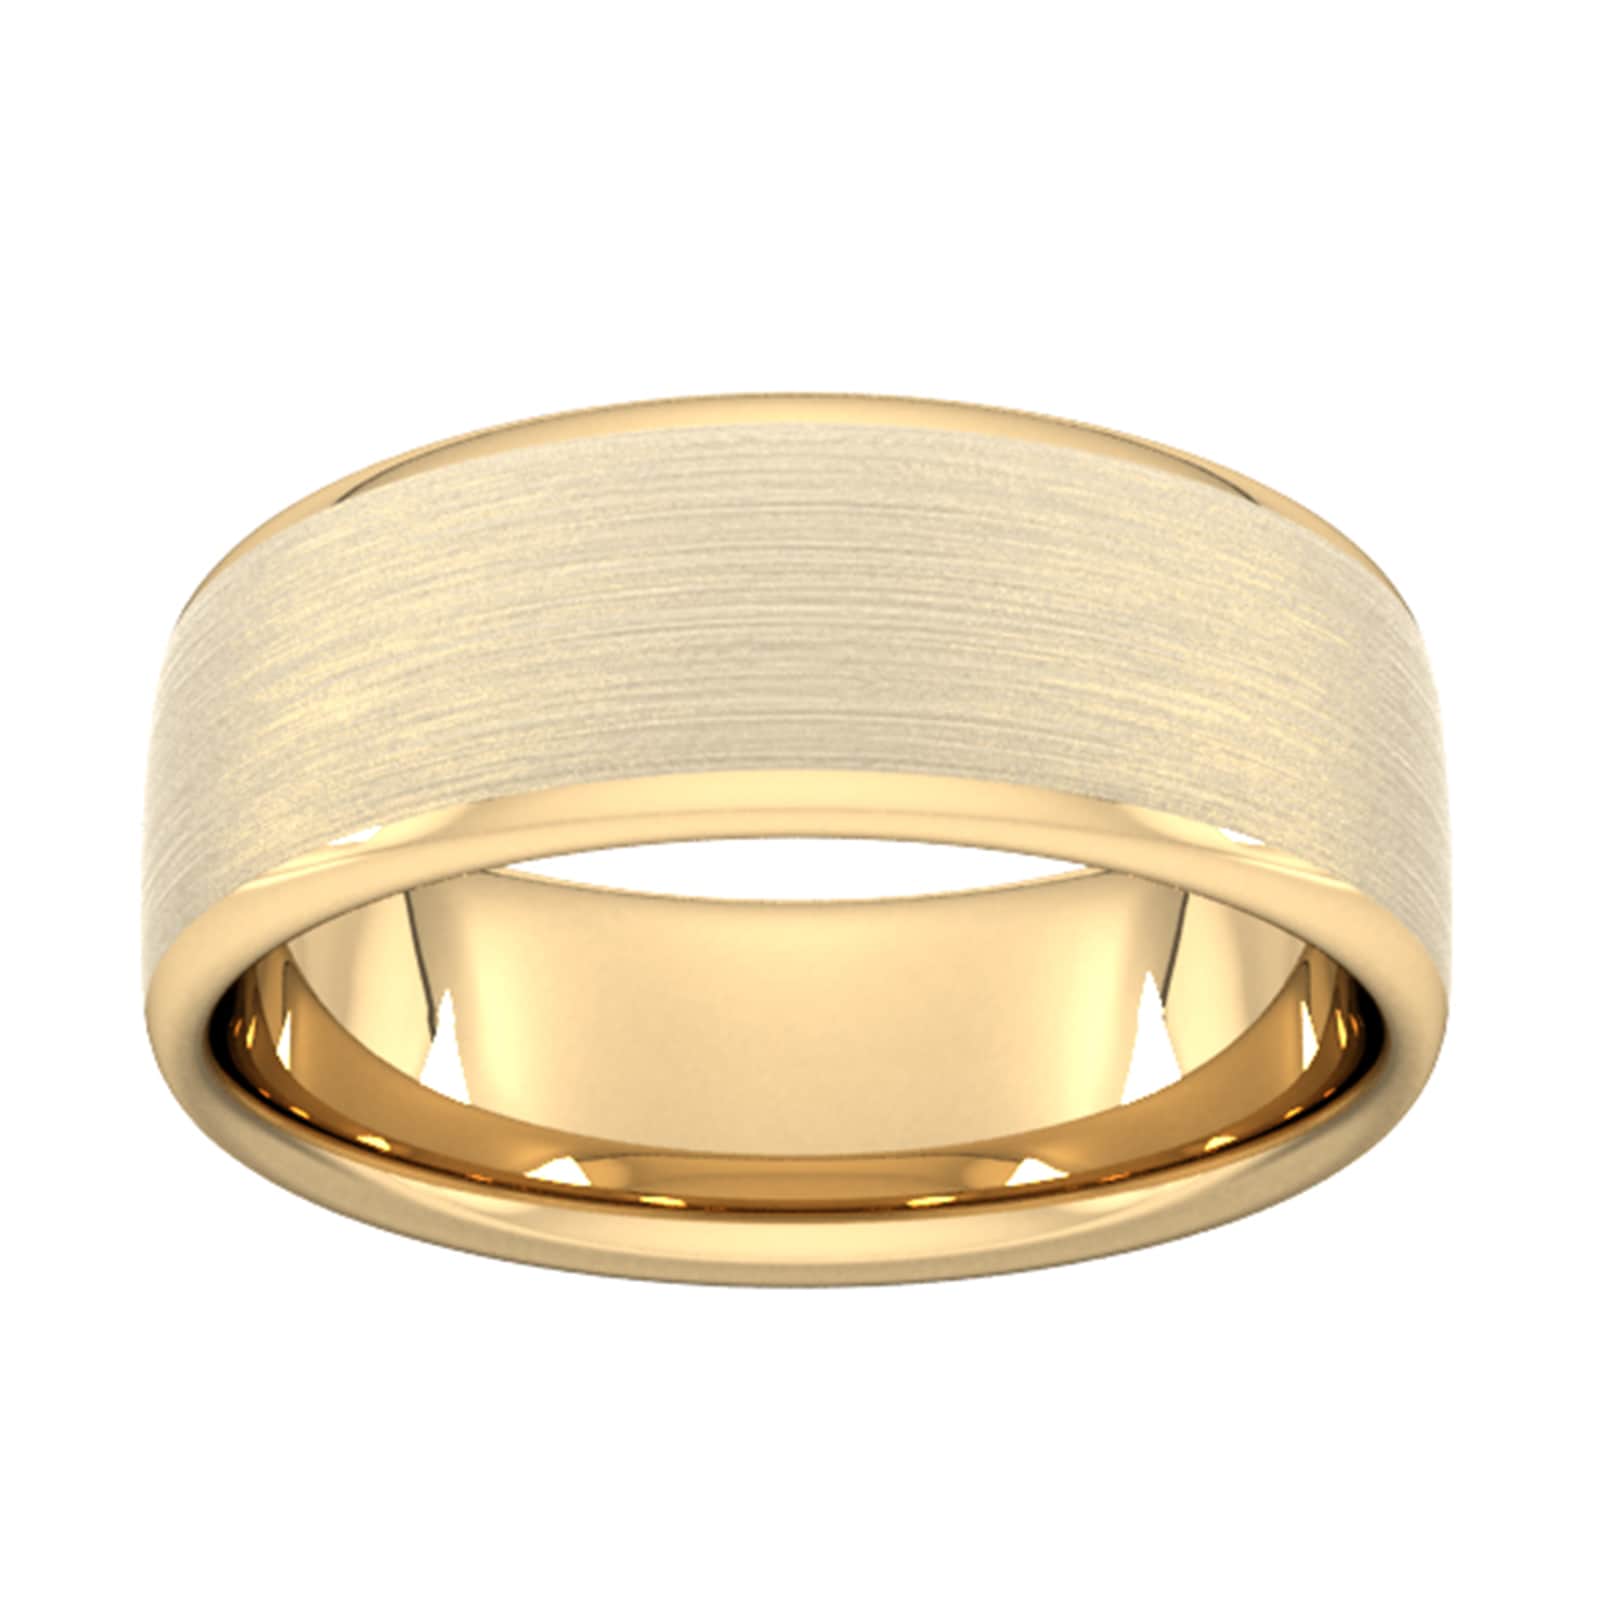 8mm Traditional Court Heavy Matt Finished Wedding Ring In 18 Carat Yellow Gold - Ring Size Z